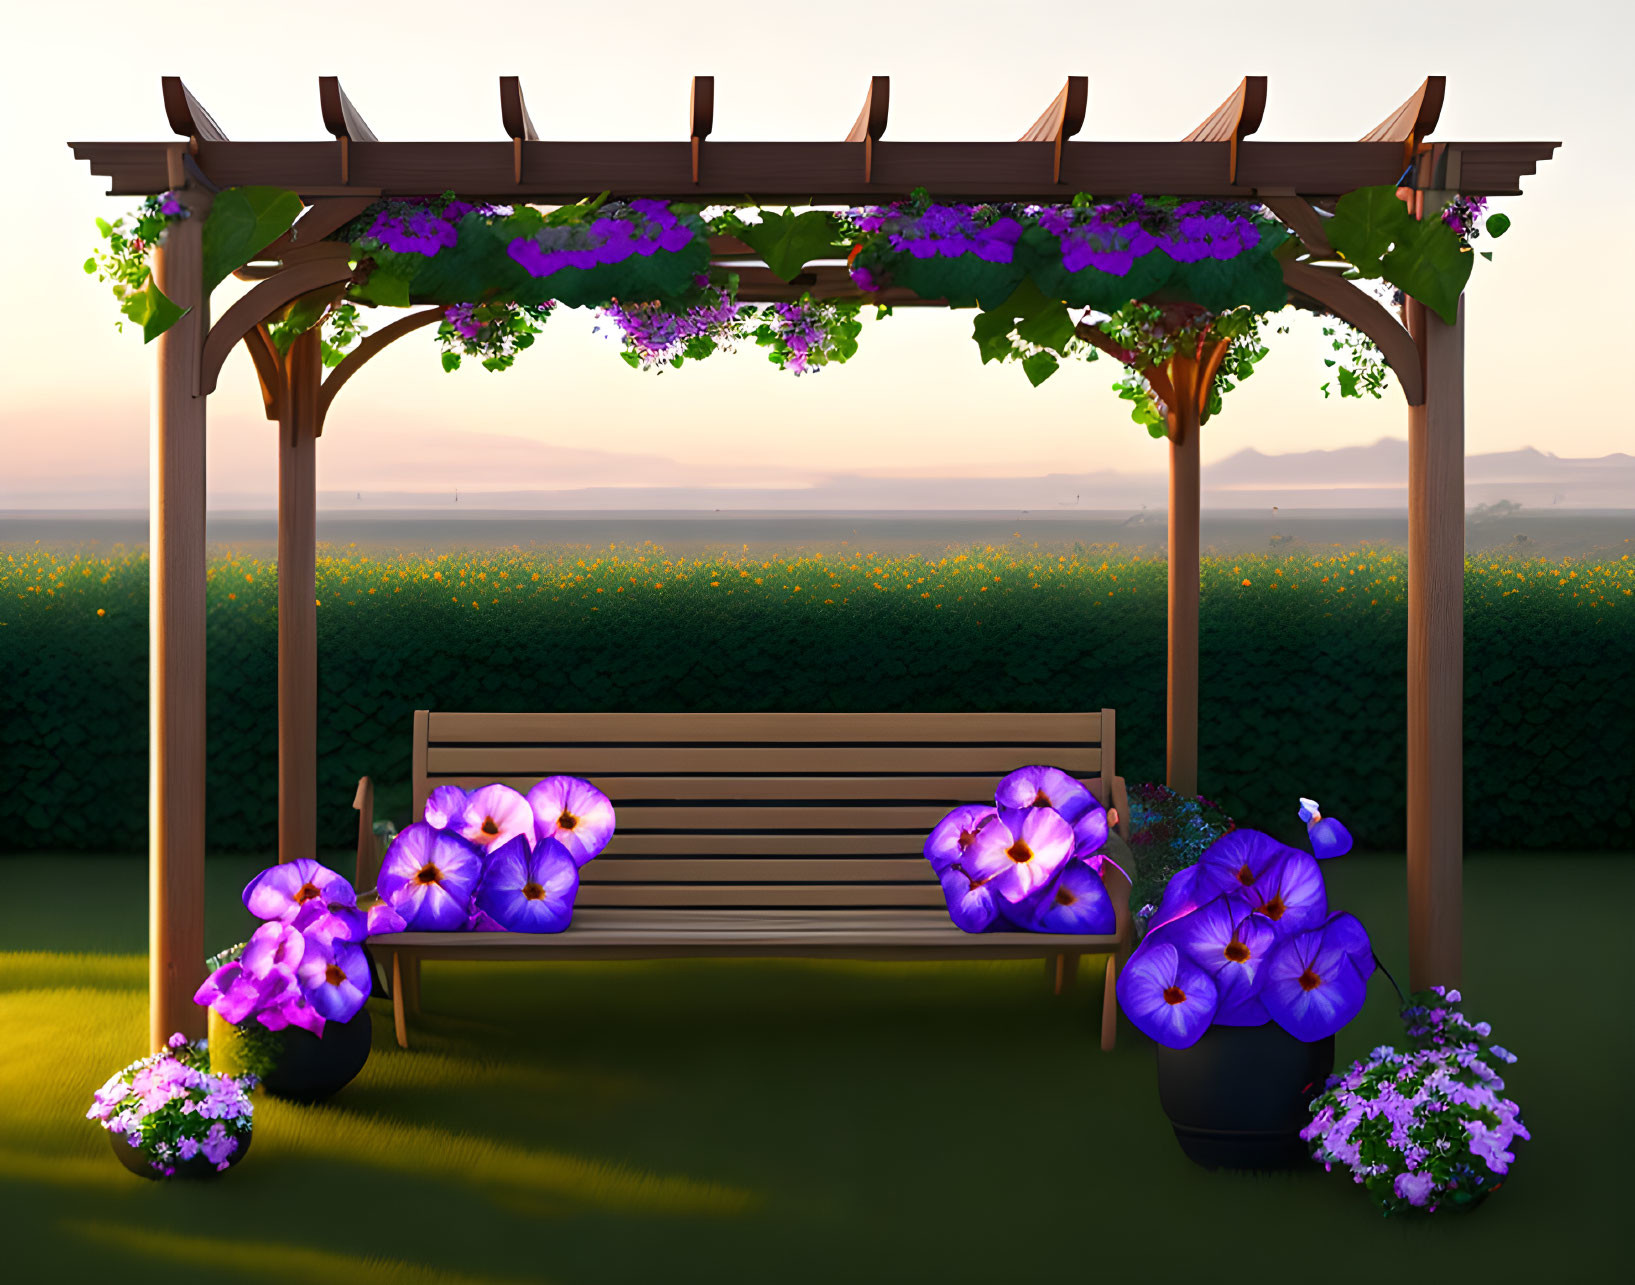 Tranquil garden with wooden pergola, purple flowers, bench, and potted plants at sunset